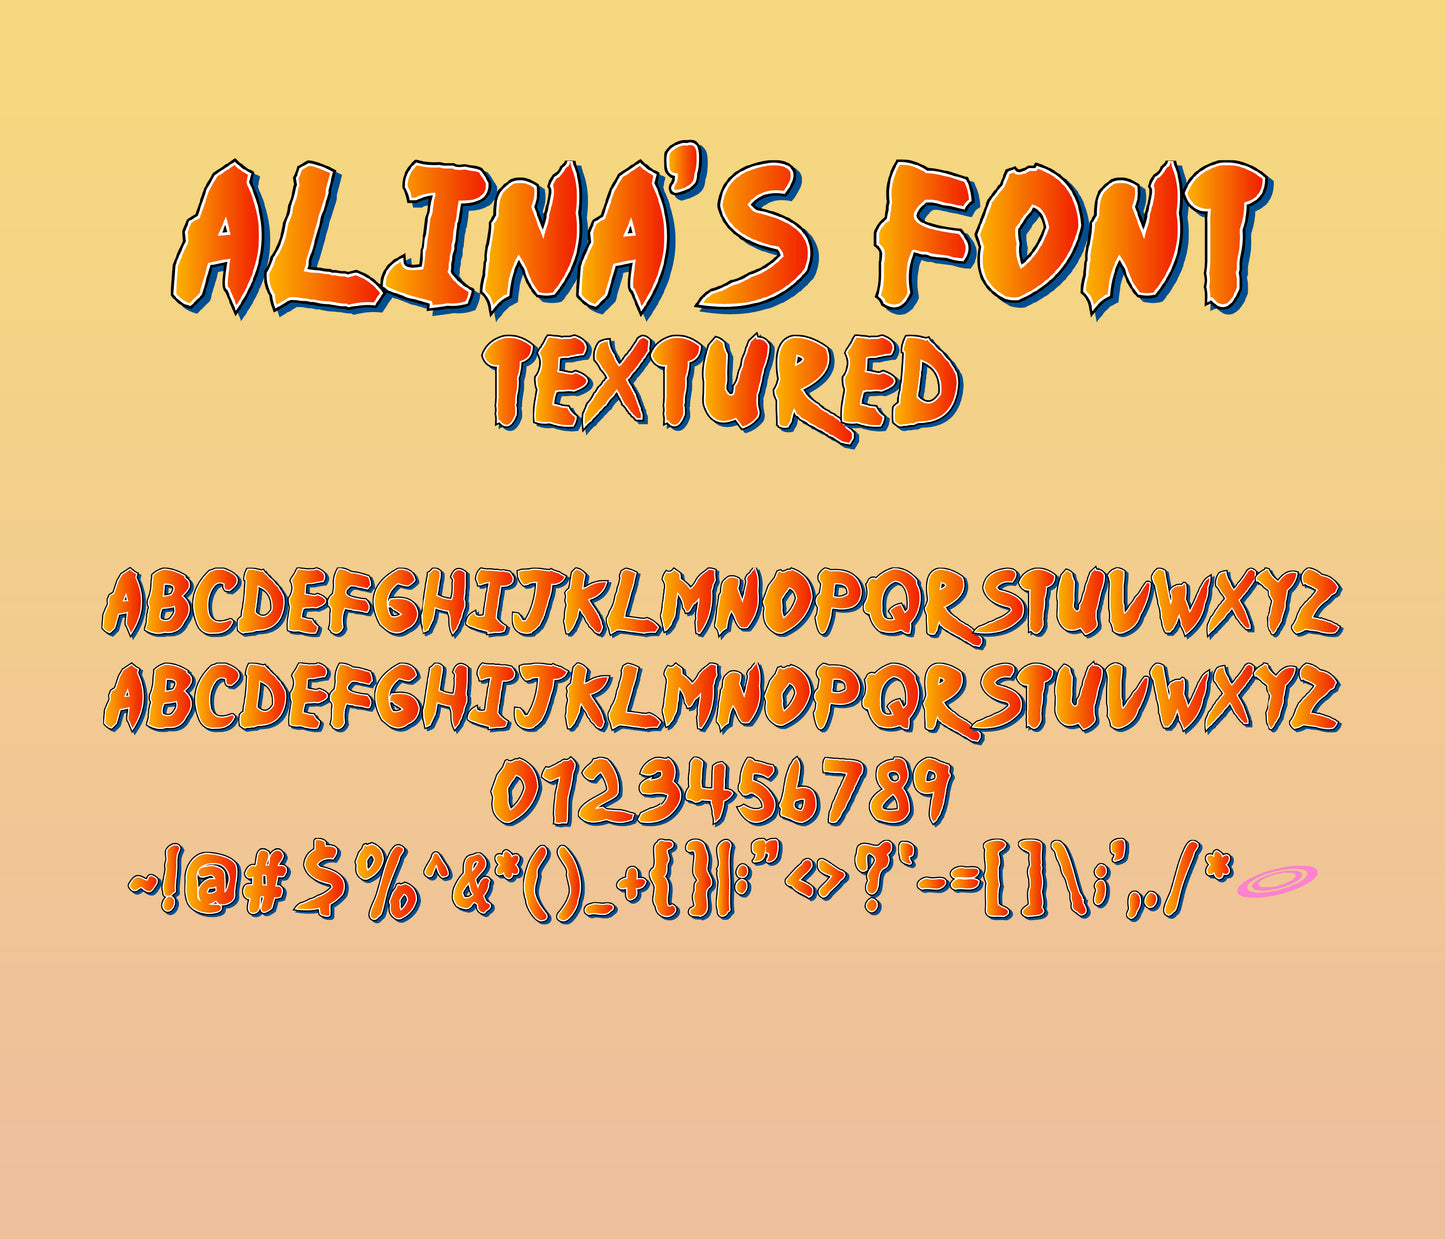 Naruto-Inspired Textured Font